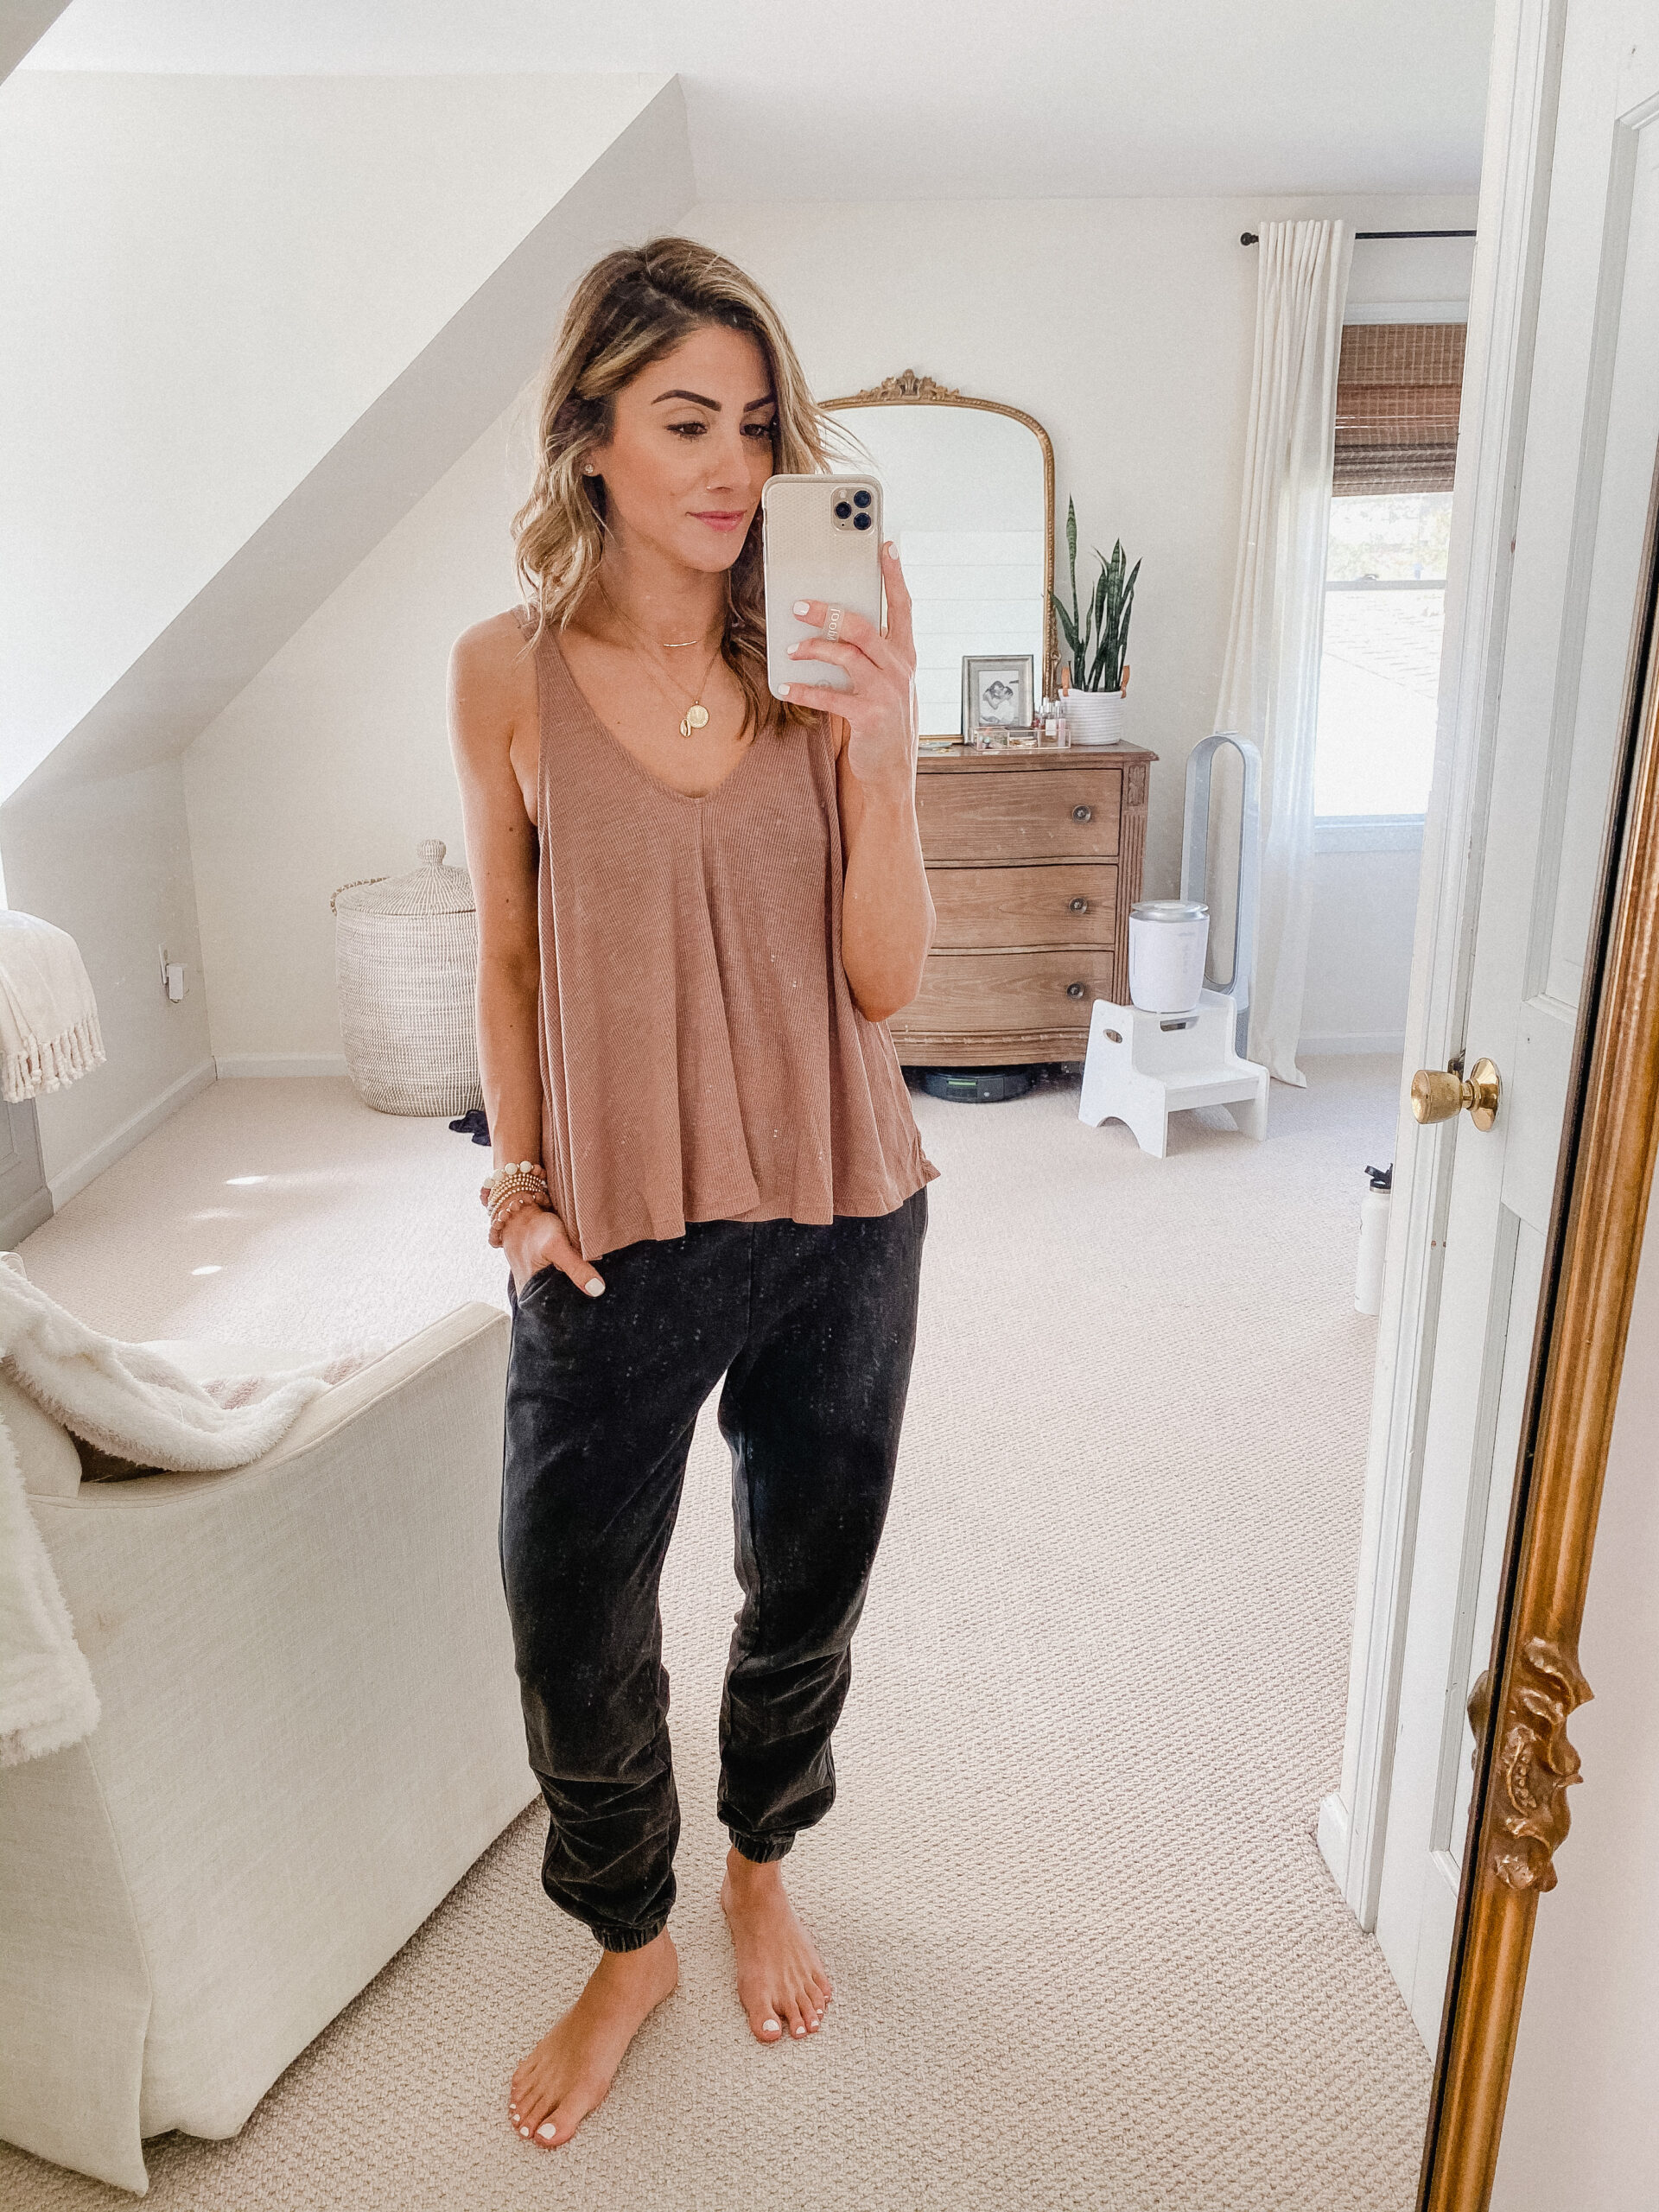 Connecticut life and style blogger Lauren McBride shares another loungewear try on, featuring a variety comfortable clothing options.